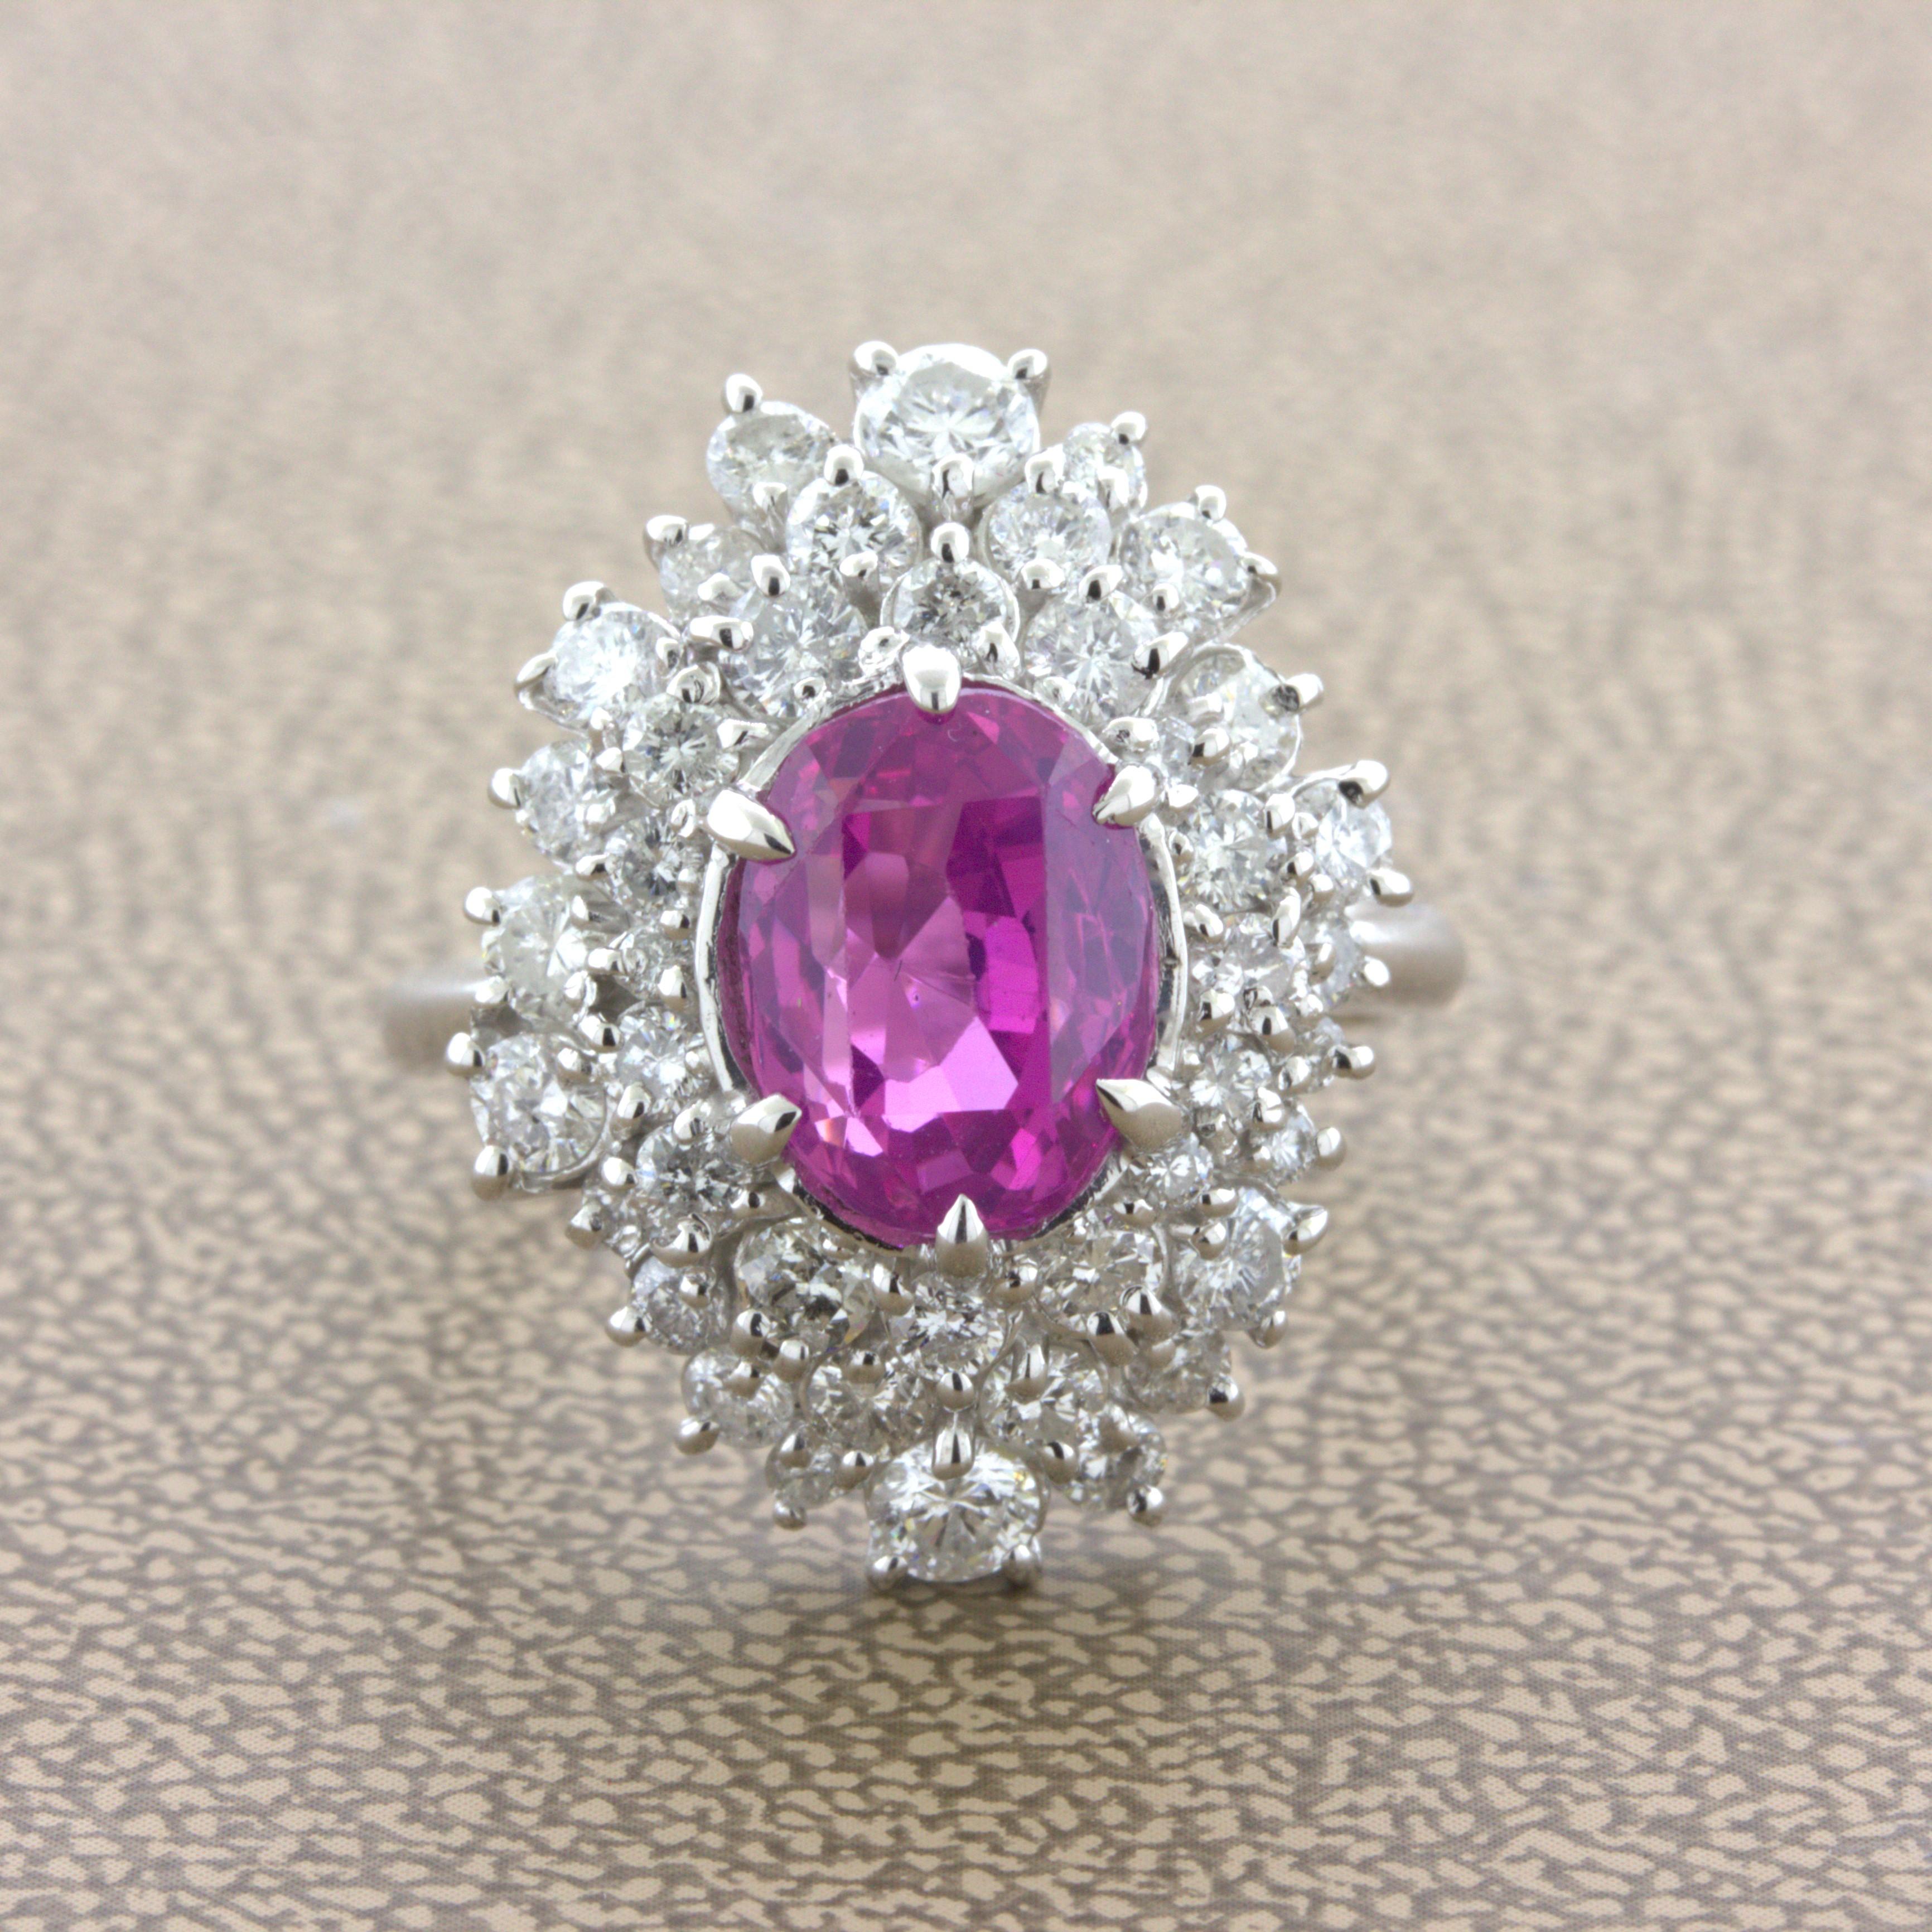 A lovely platinum ring featuring a very fine pink sapphire with a bright rich color. The 4.25 carat oval-shaped sapphire is very clean allowing the stones natural barbie-pink color to pop. It is complemented by 2.32 carats of round brilliant-cut